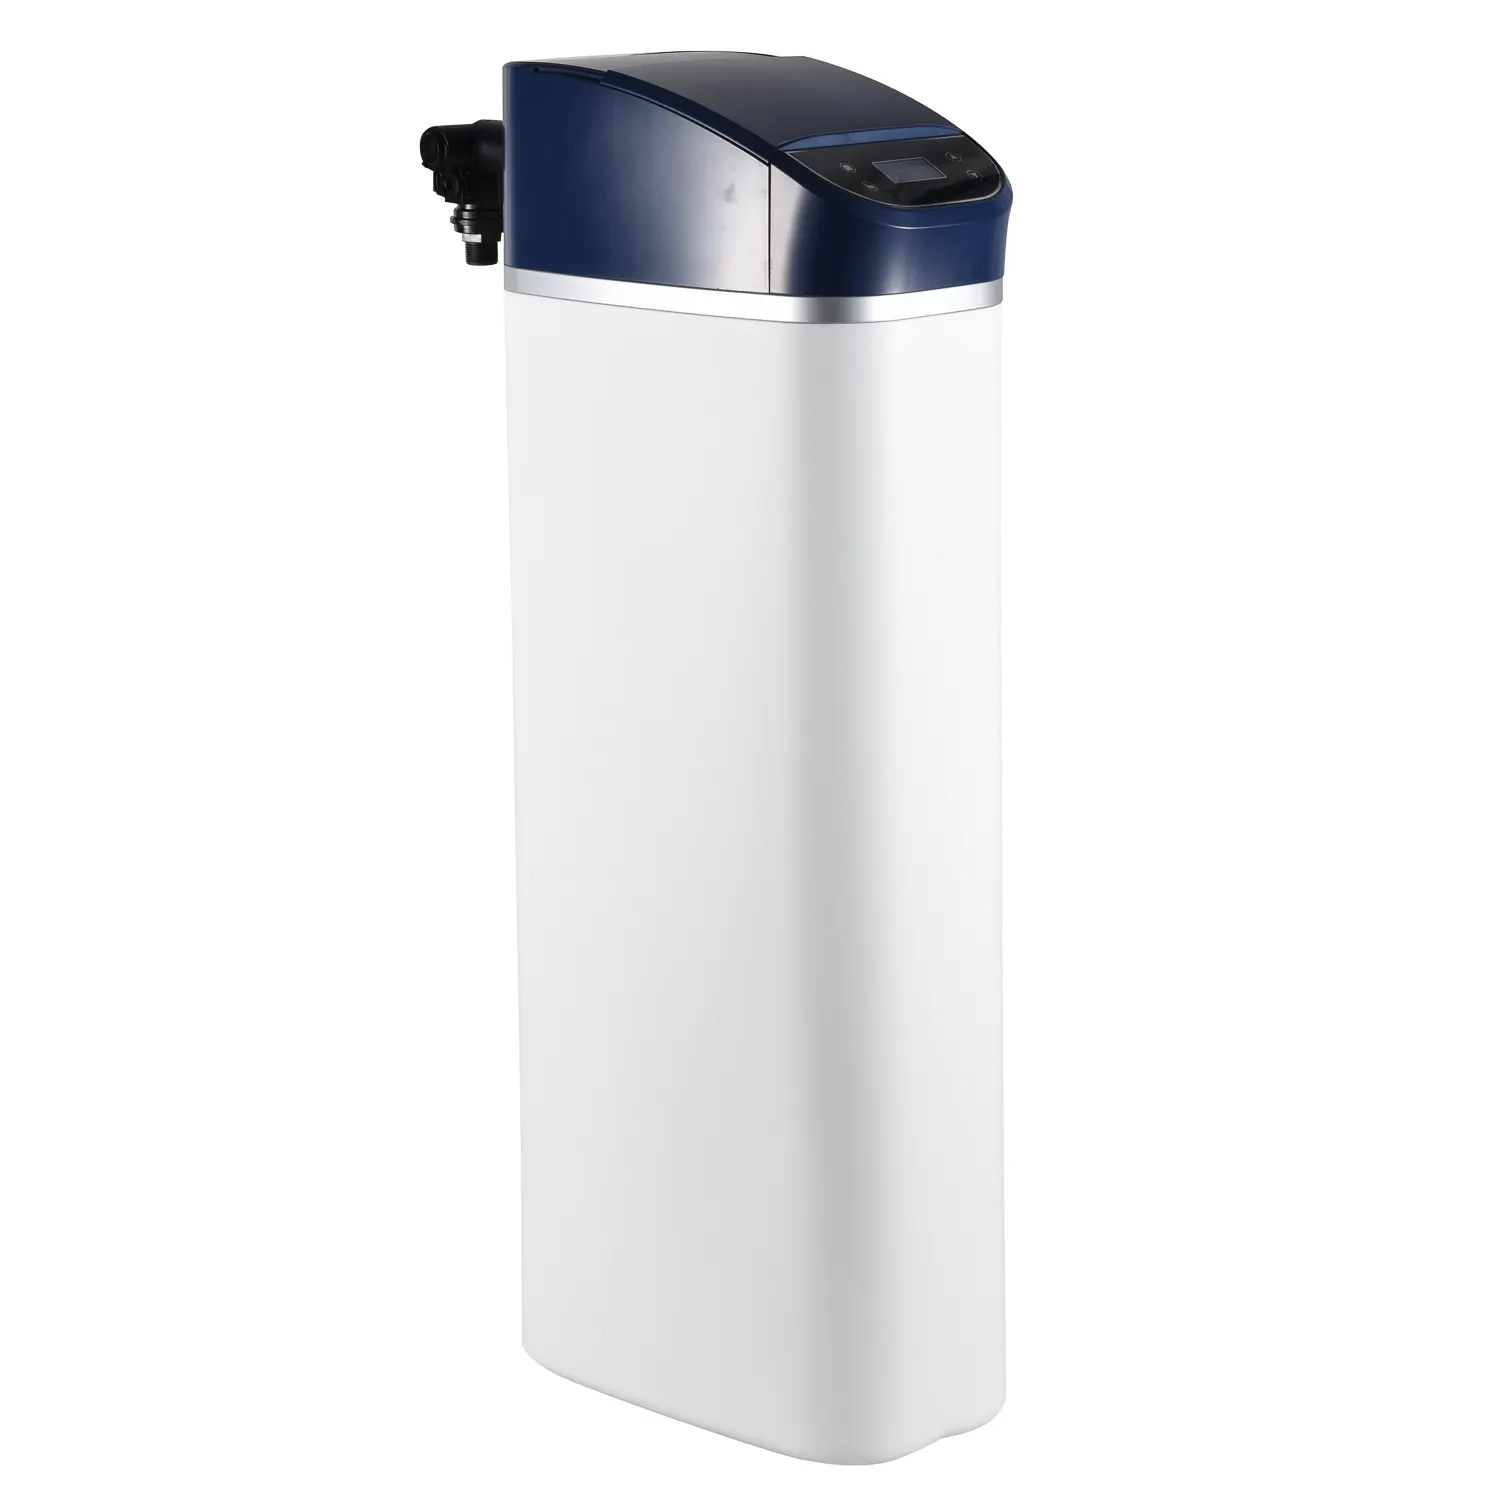 2021 Water Treatment Home Automatic Regeneration Residential Domestic Water Softener Syste